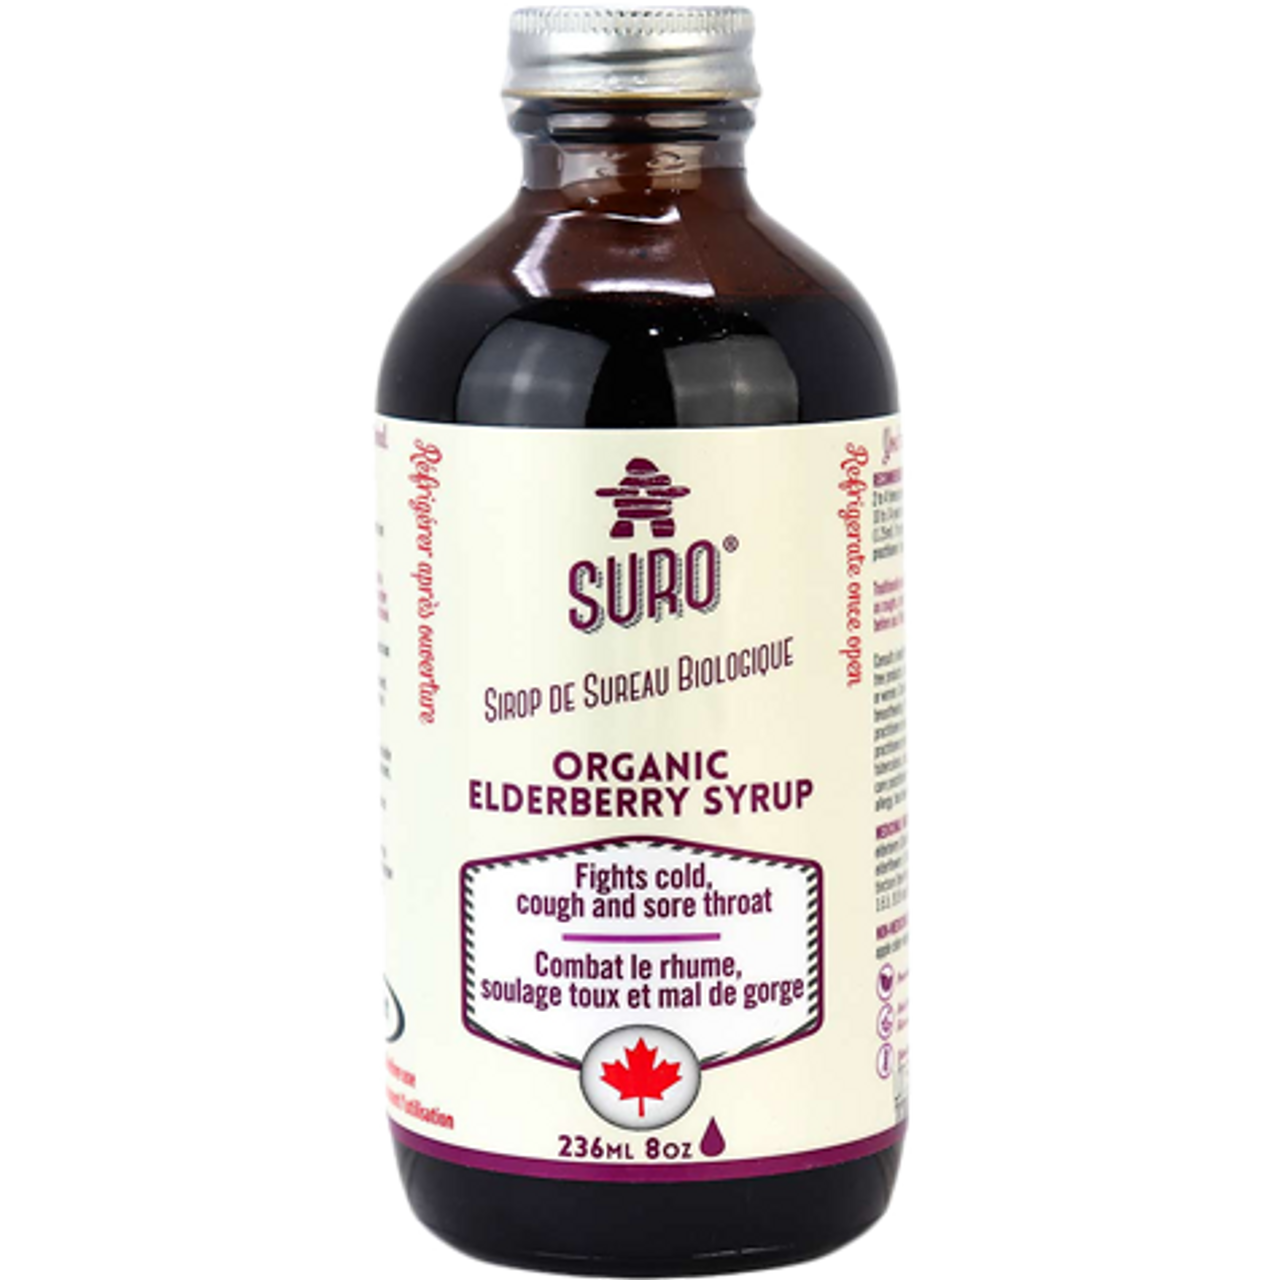 Elderberry syrup for bronchial health